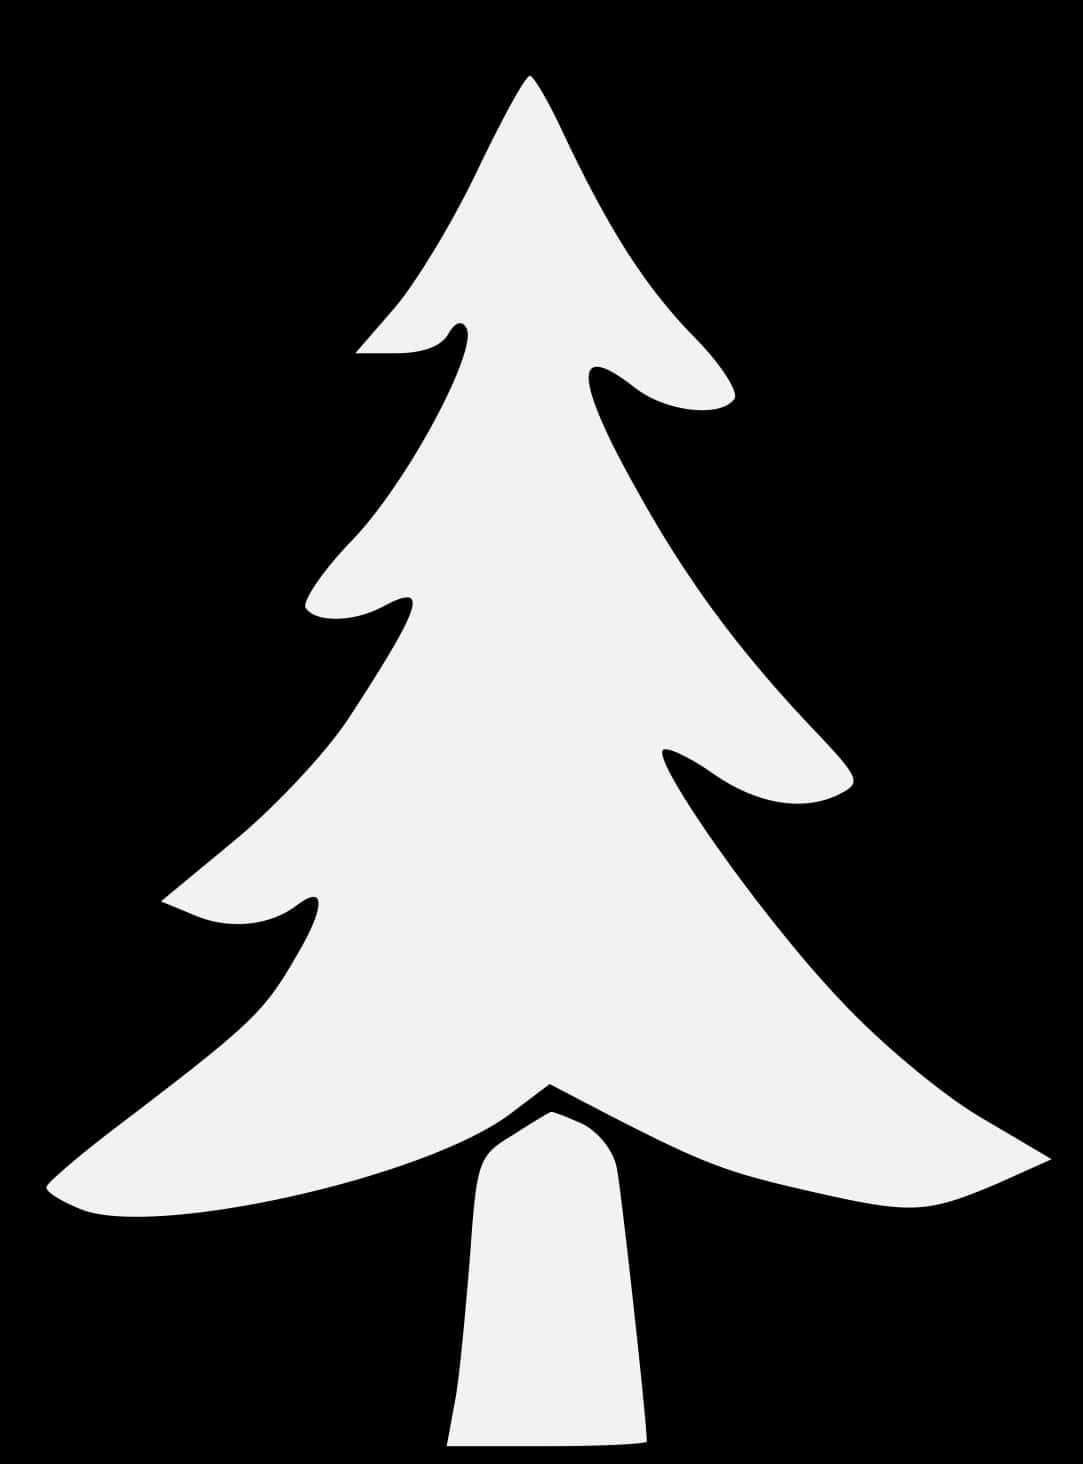 A White Tree On A Black Background